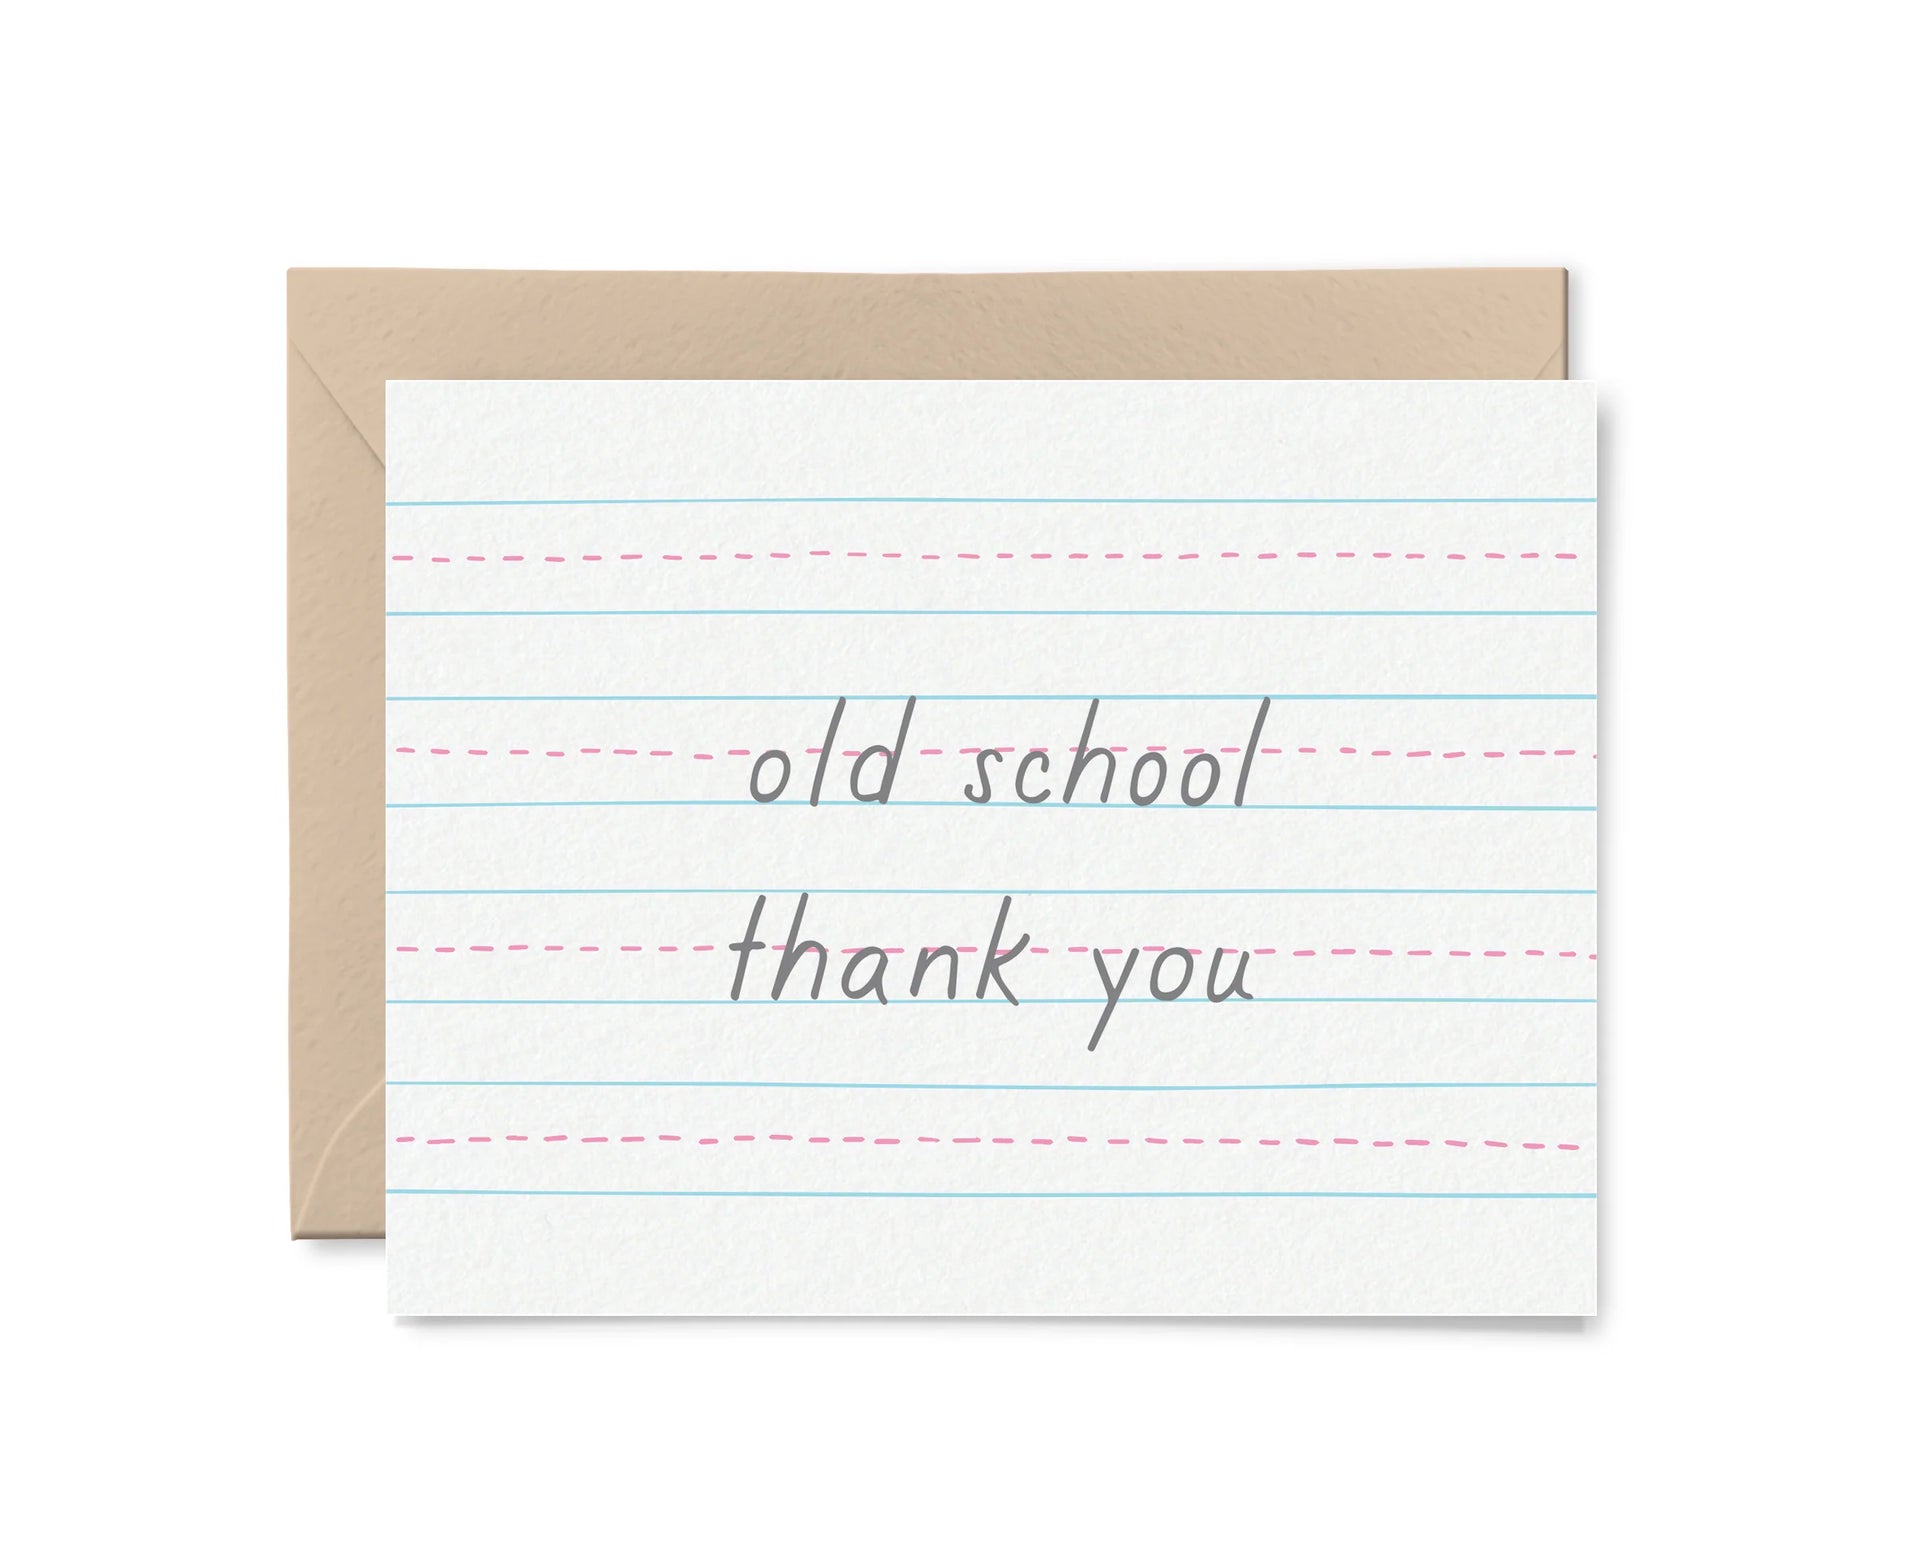 OLD SCHOOL THANK YOU CARD